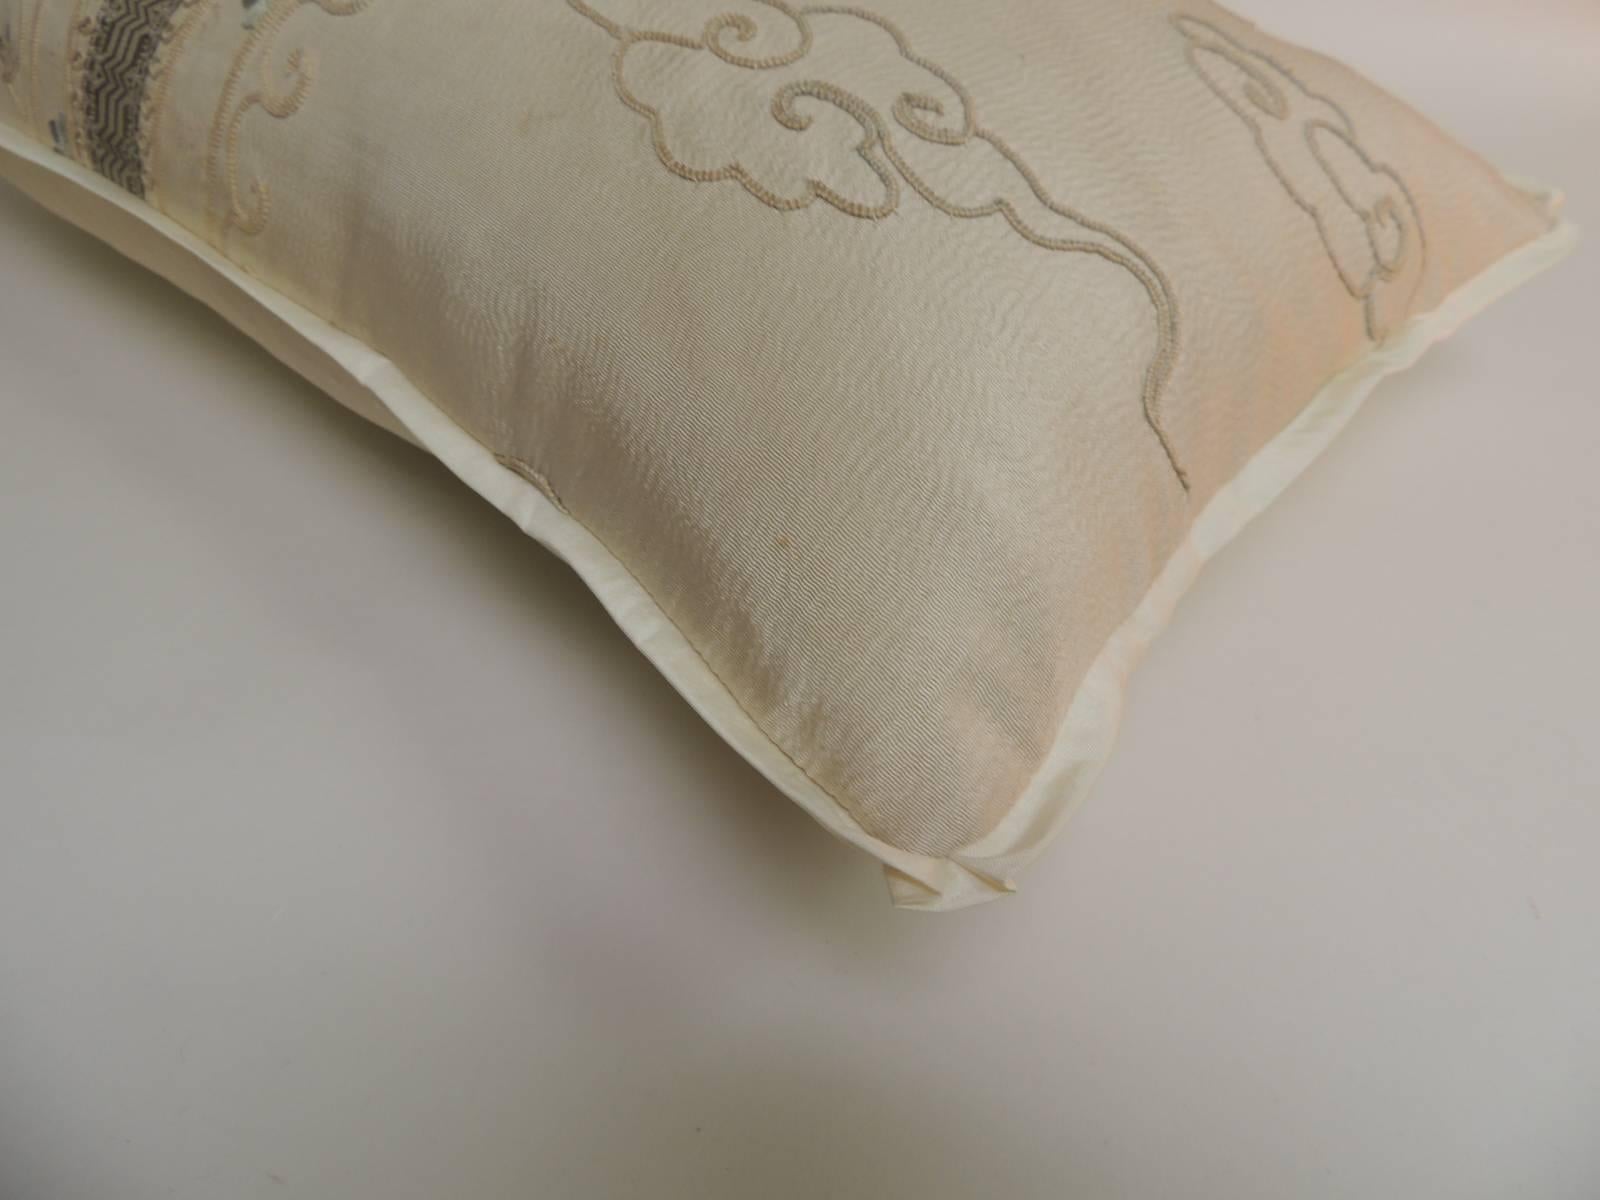 Japanese 19th Century Asian Embroidered Deco Dragon Silk Bolster Decorative Pillow